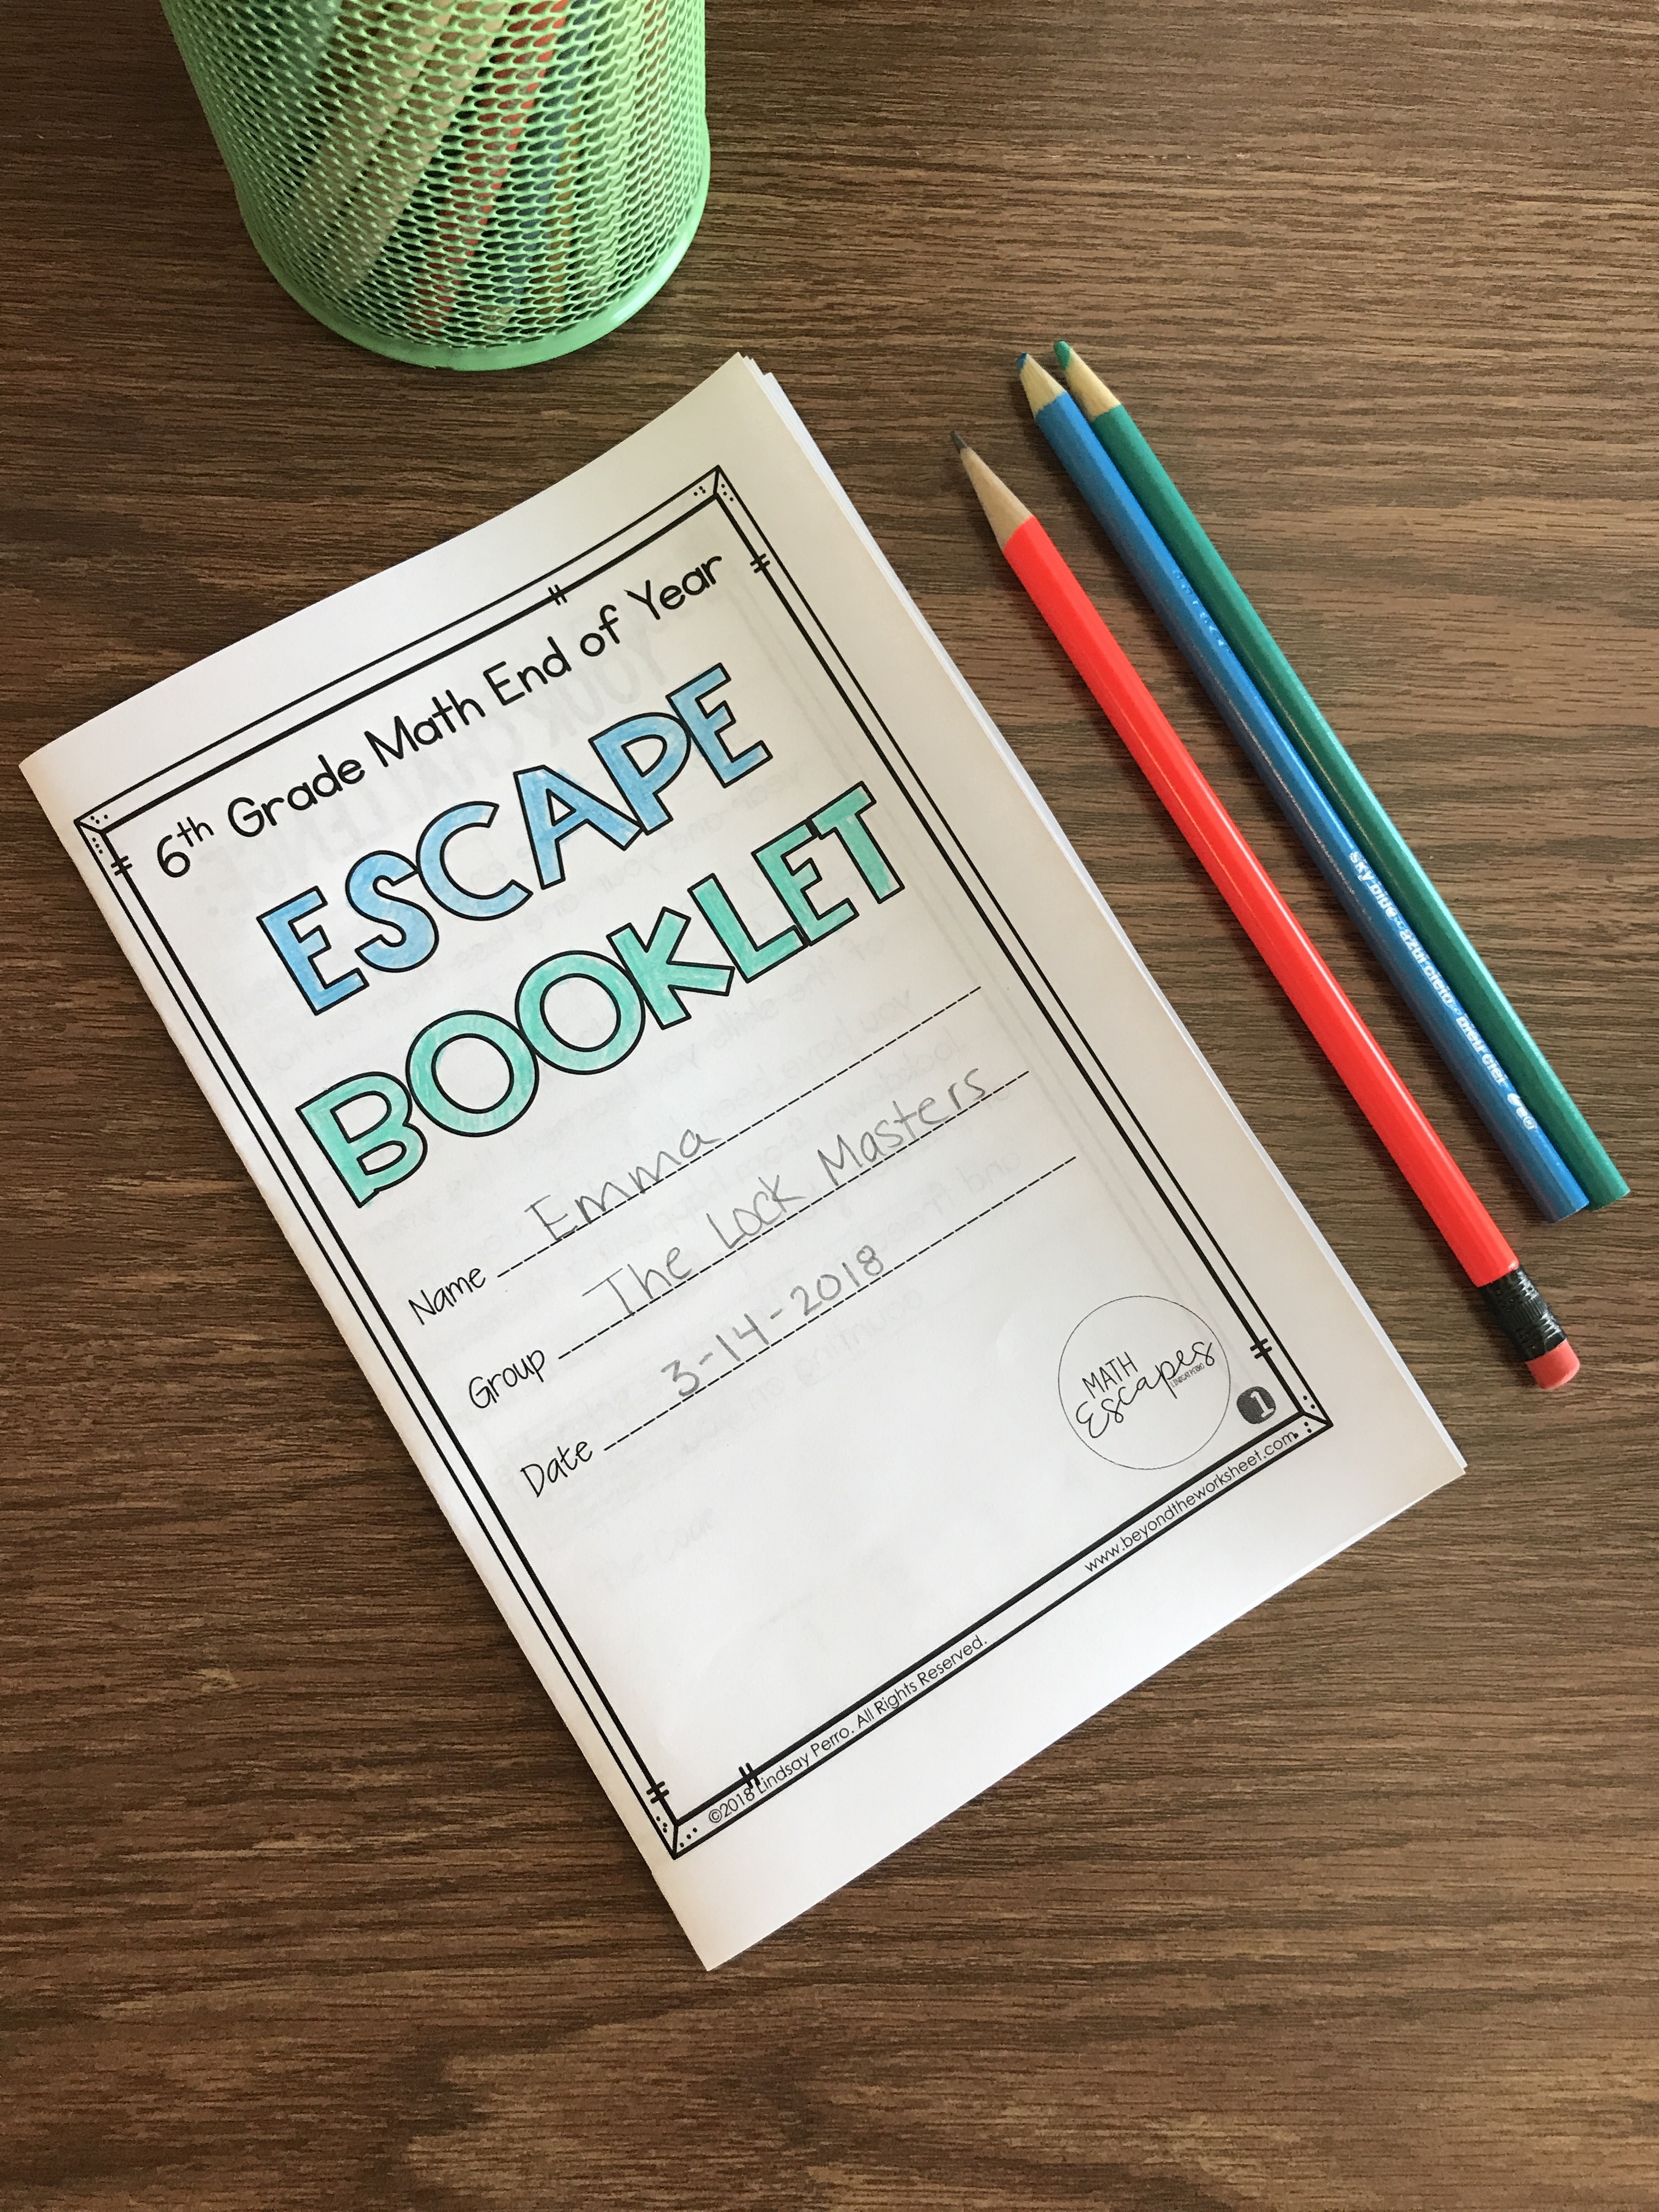 6th Grade Math End Of Year Escape Room Activity